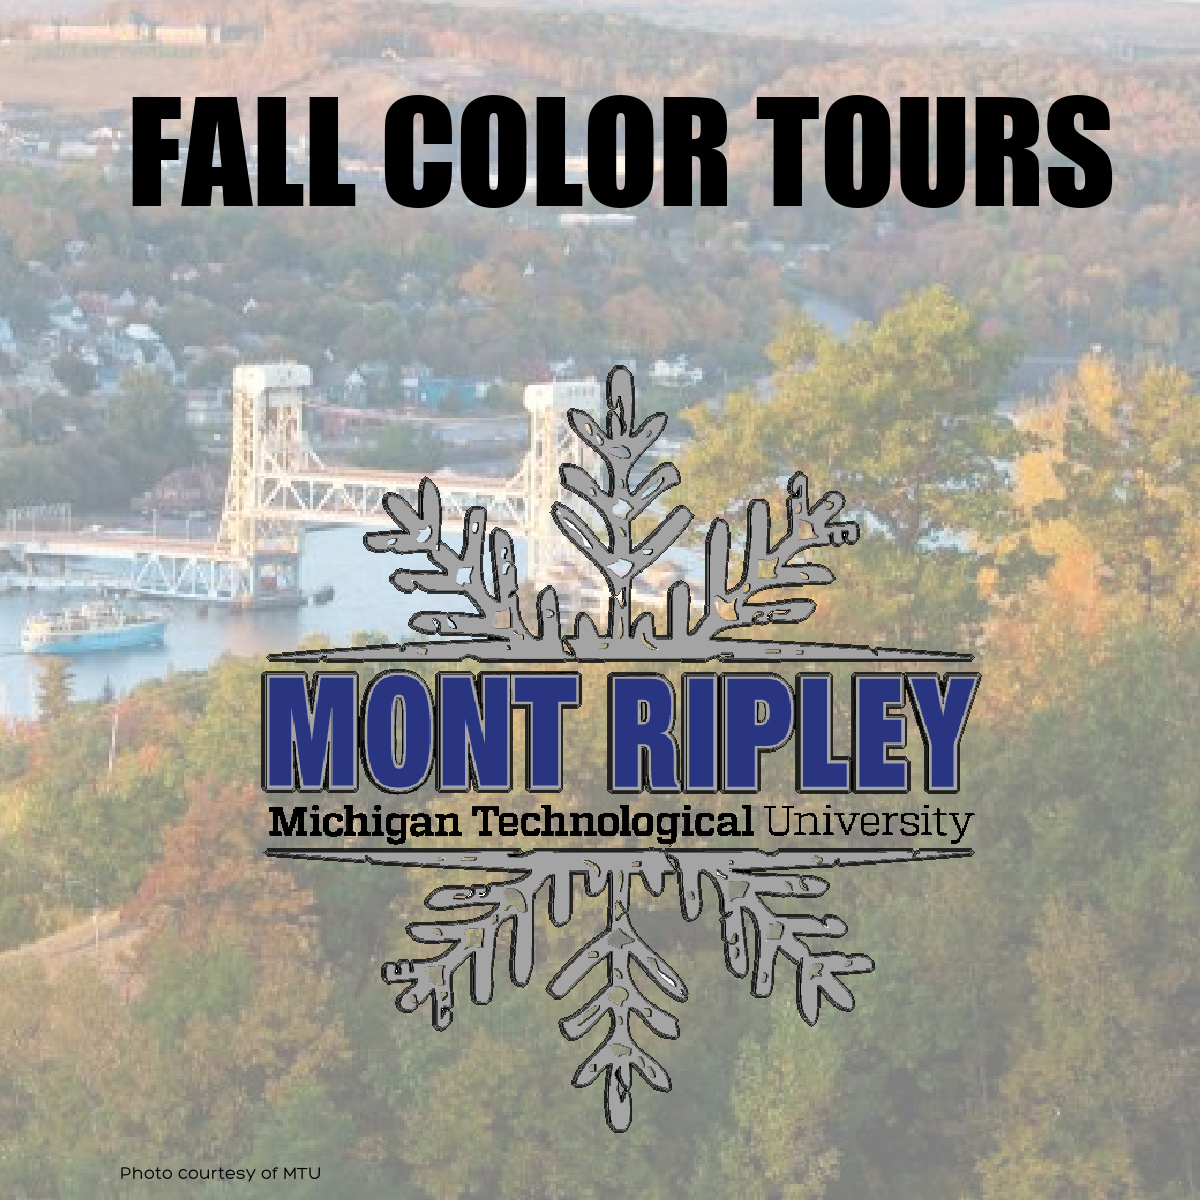 Fall Color Tours! Ripley News & Announcements